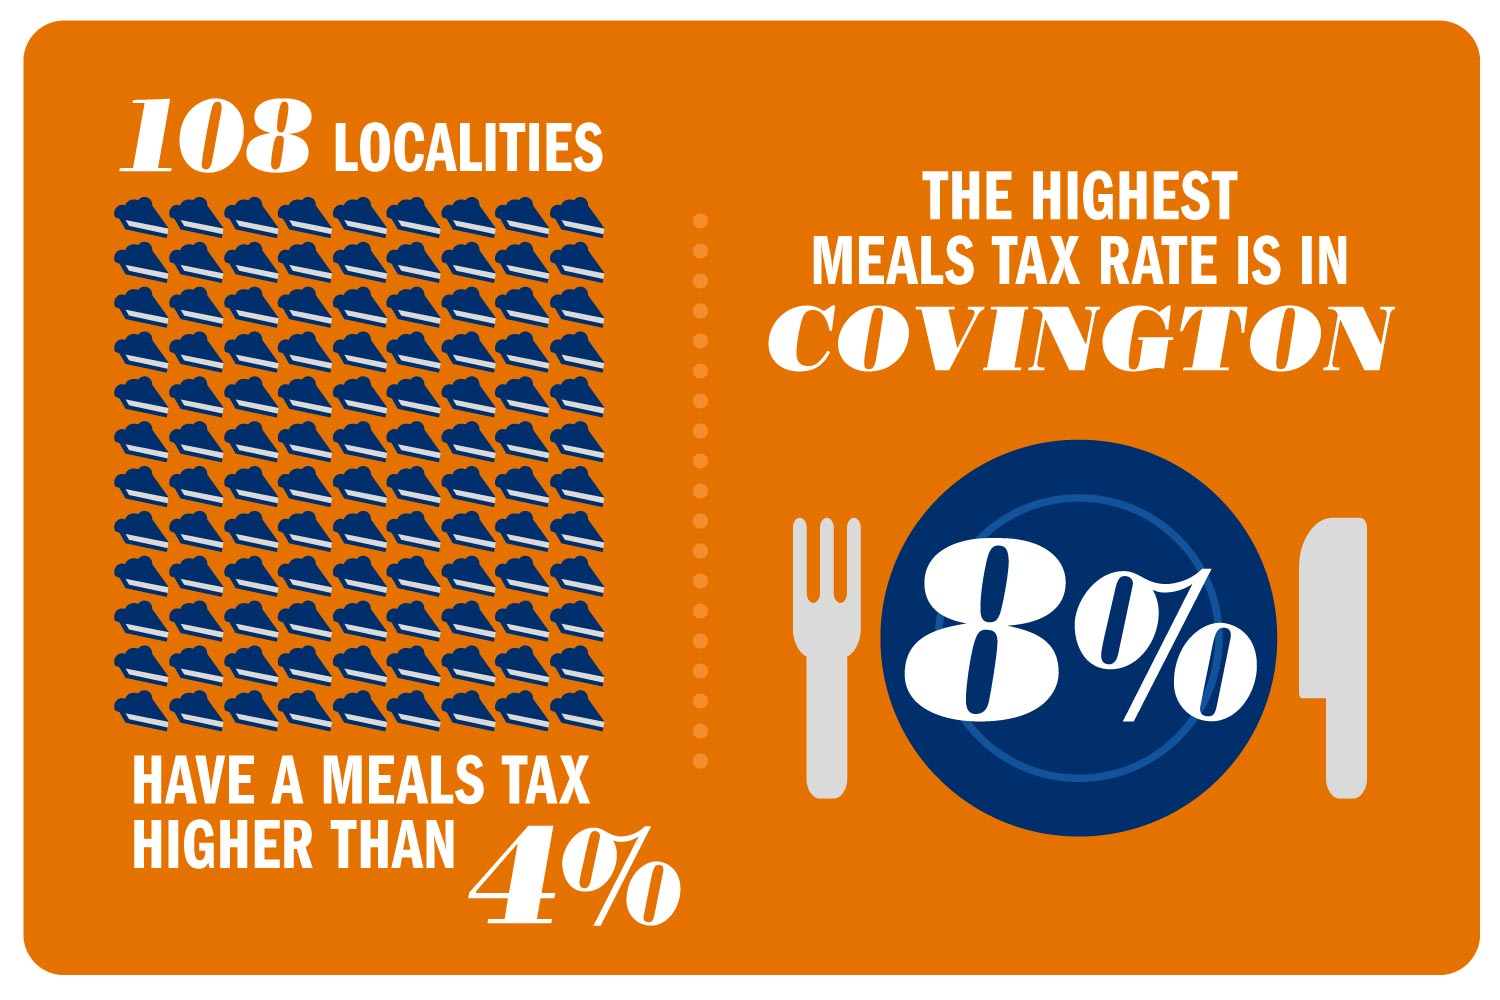 Text reads: 108 Localities have a meals tax higher than 4%.  The highest Meals tax rate is in Covington 8%